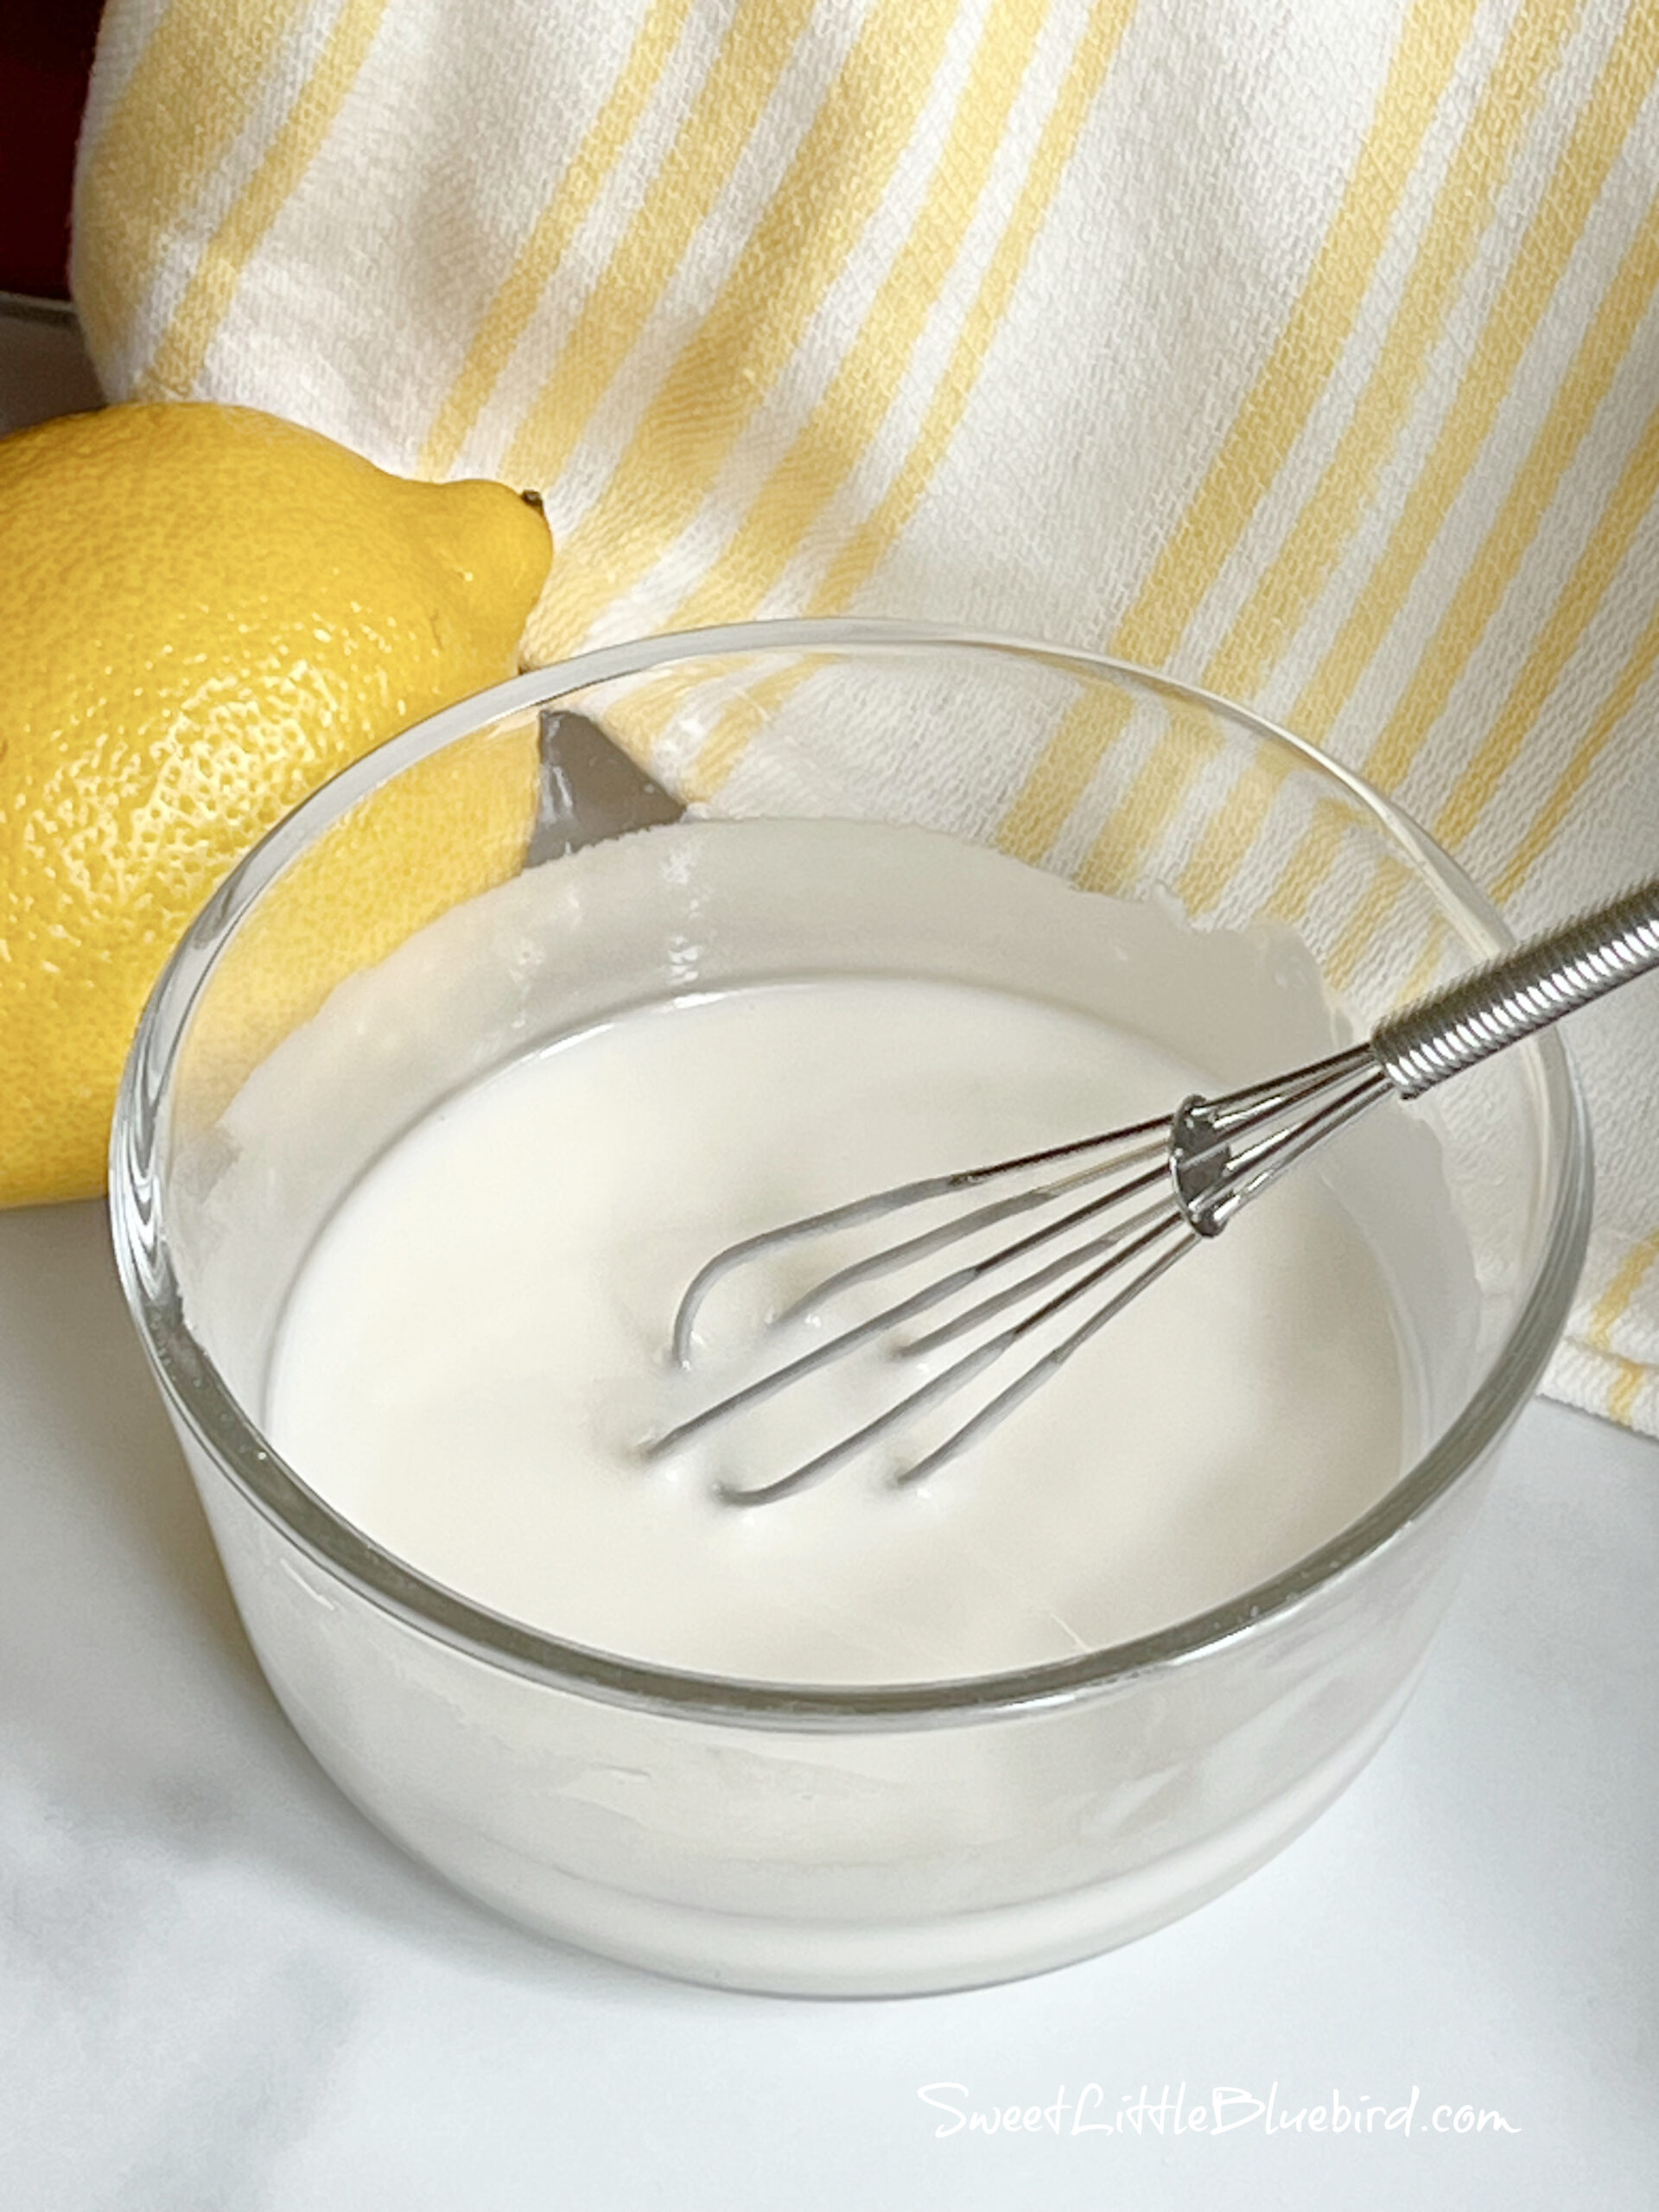 This photo shows lemon glaze in a small clear glass bowl with a small whisk.